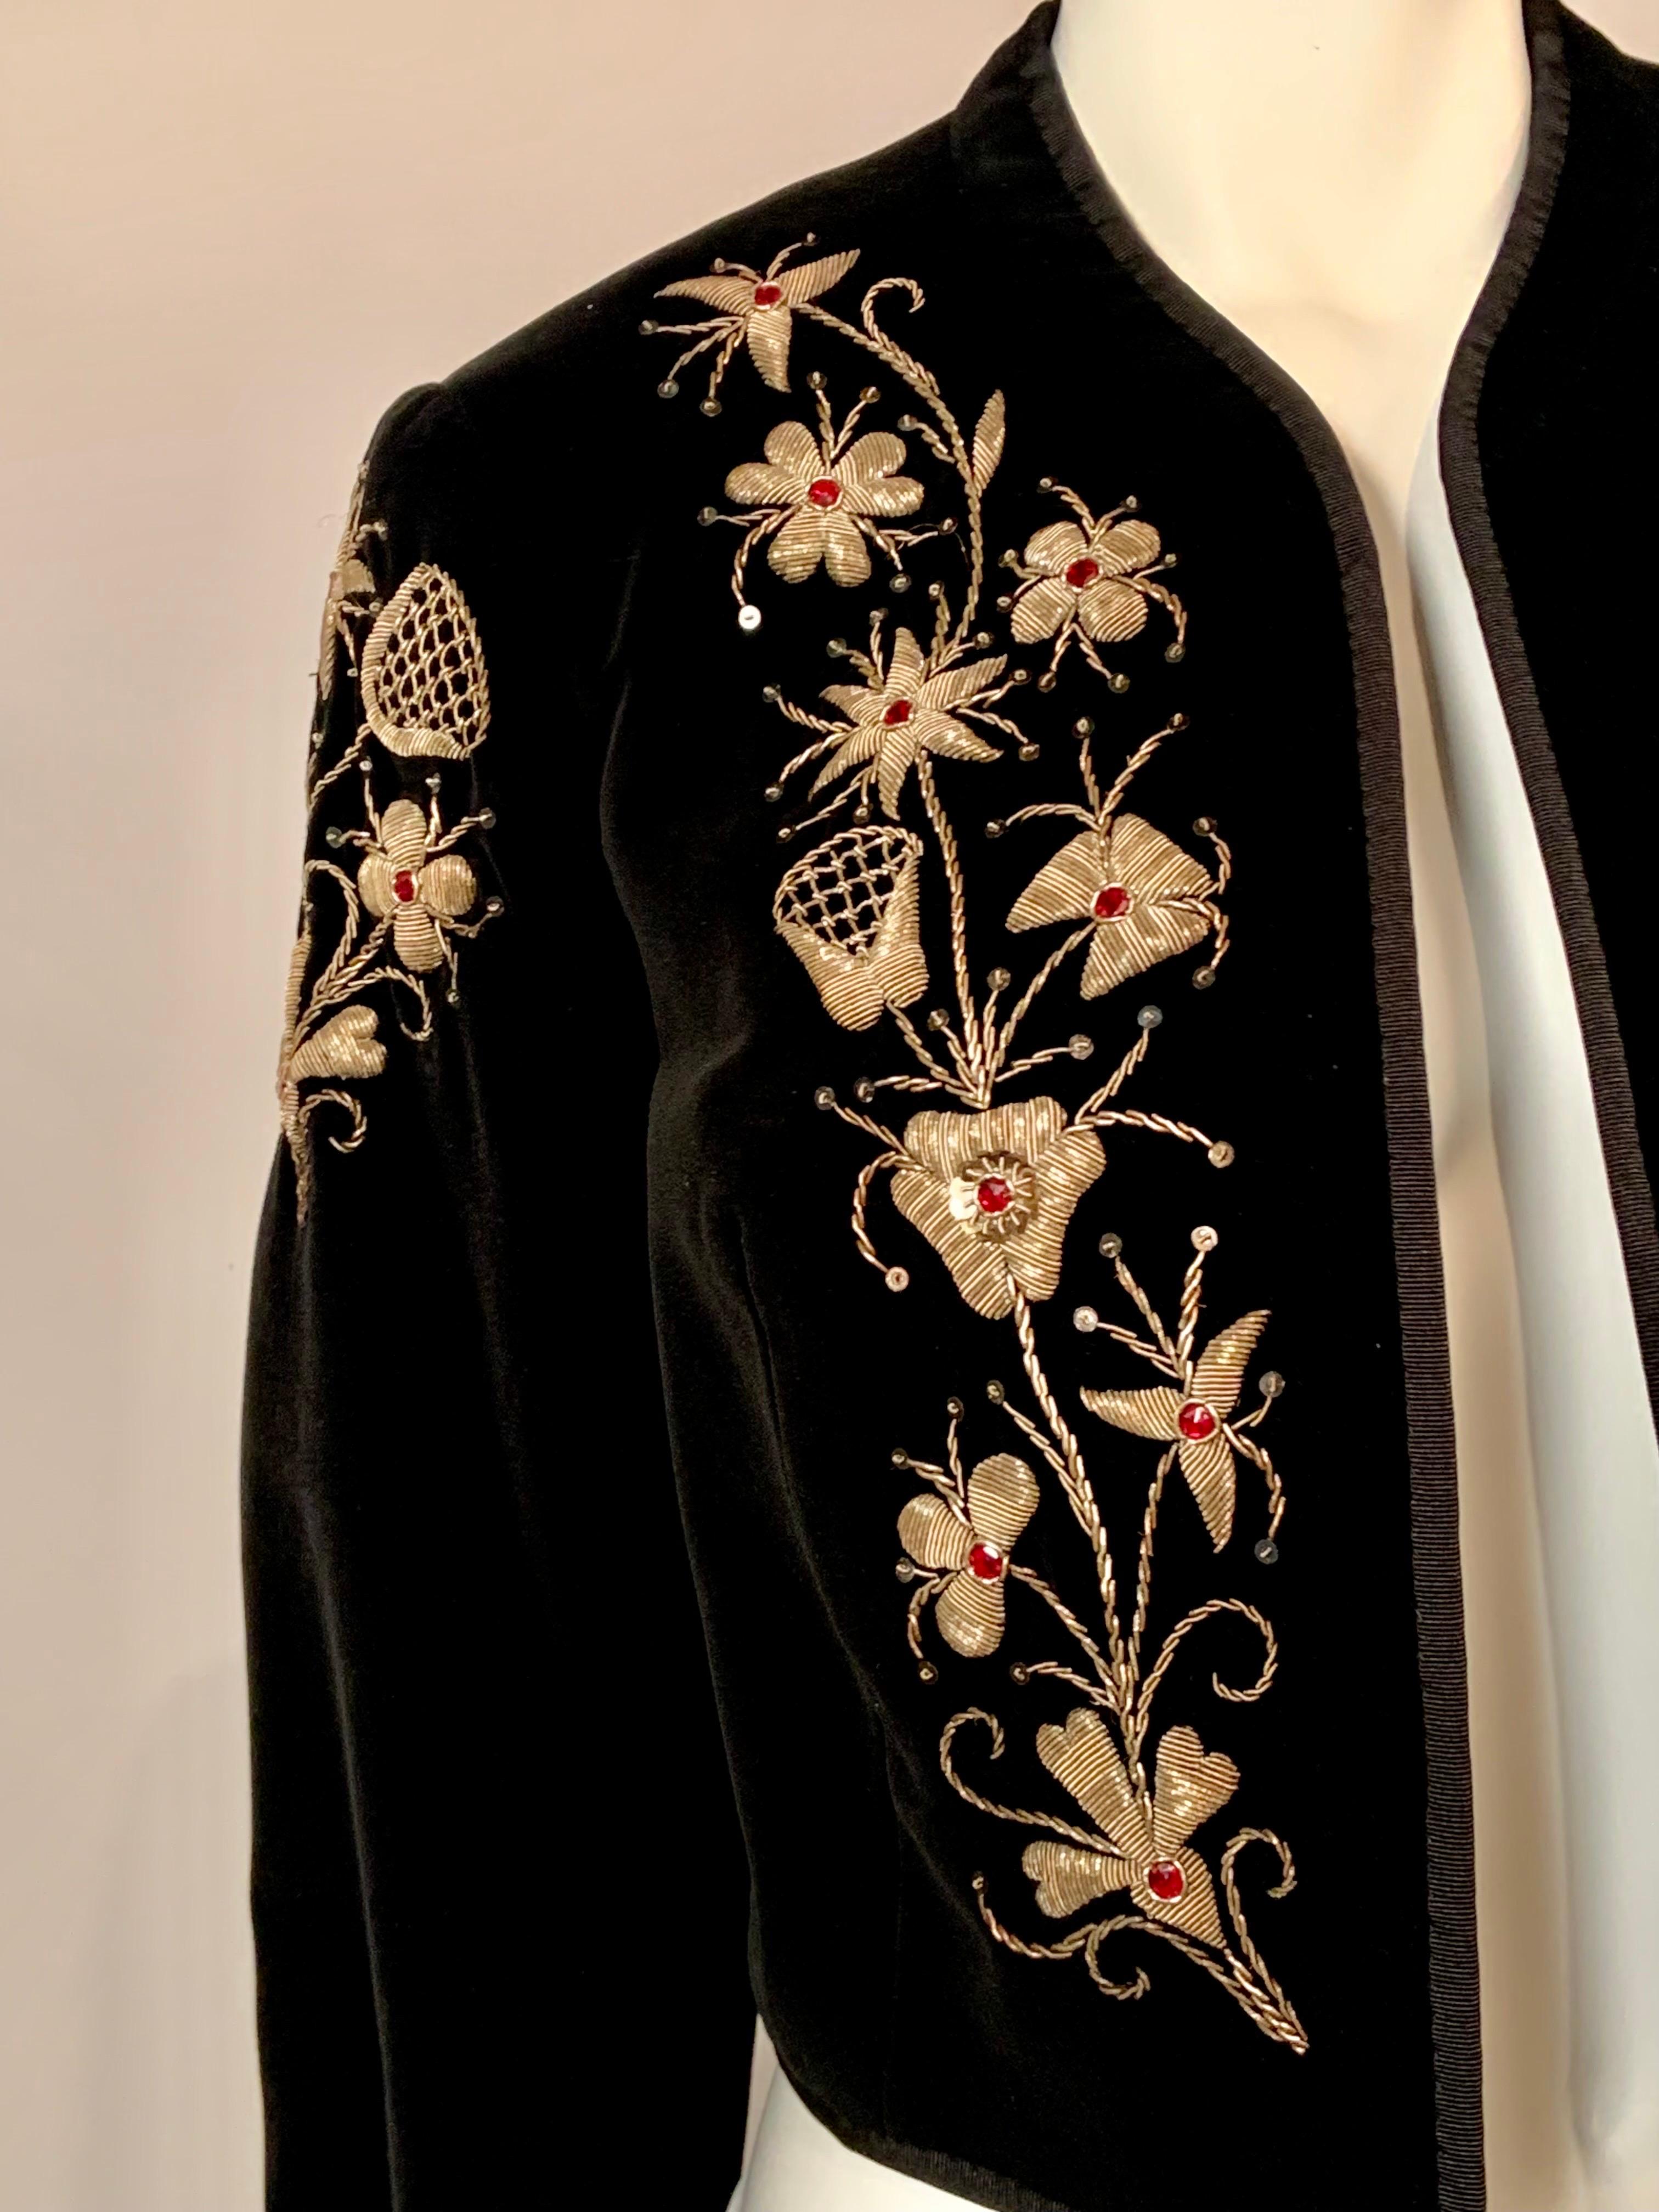 This black velvet bolero jacket was made in Madrid, circa 1970 and the right front side of 
the jacket has a large floral design embroidered in gold thread with red beads at the center of the flowers.  This embroidered design is repeated at the top